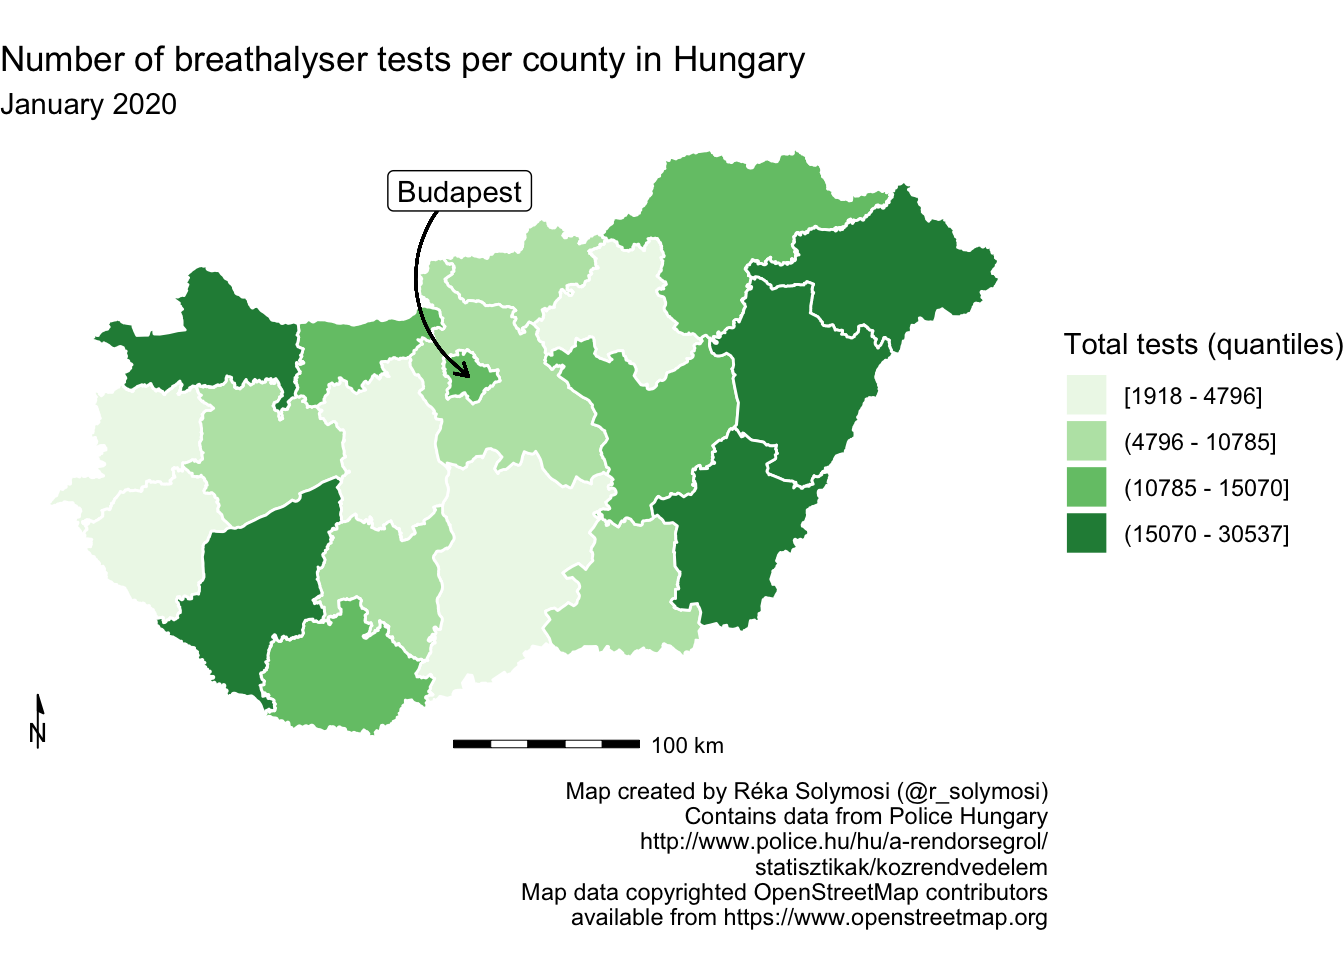 The addition this time is a longer horizontal bar, segmented into five sections alternating black and white. The text 'one hundred kilometers' appears next to it. It appears beneath the map of Hungary but above the attributions.